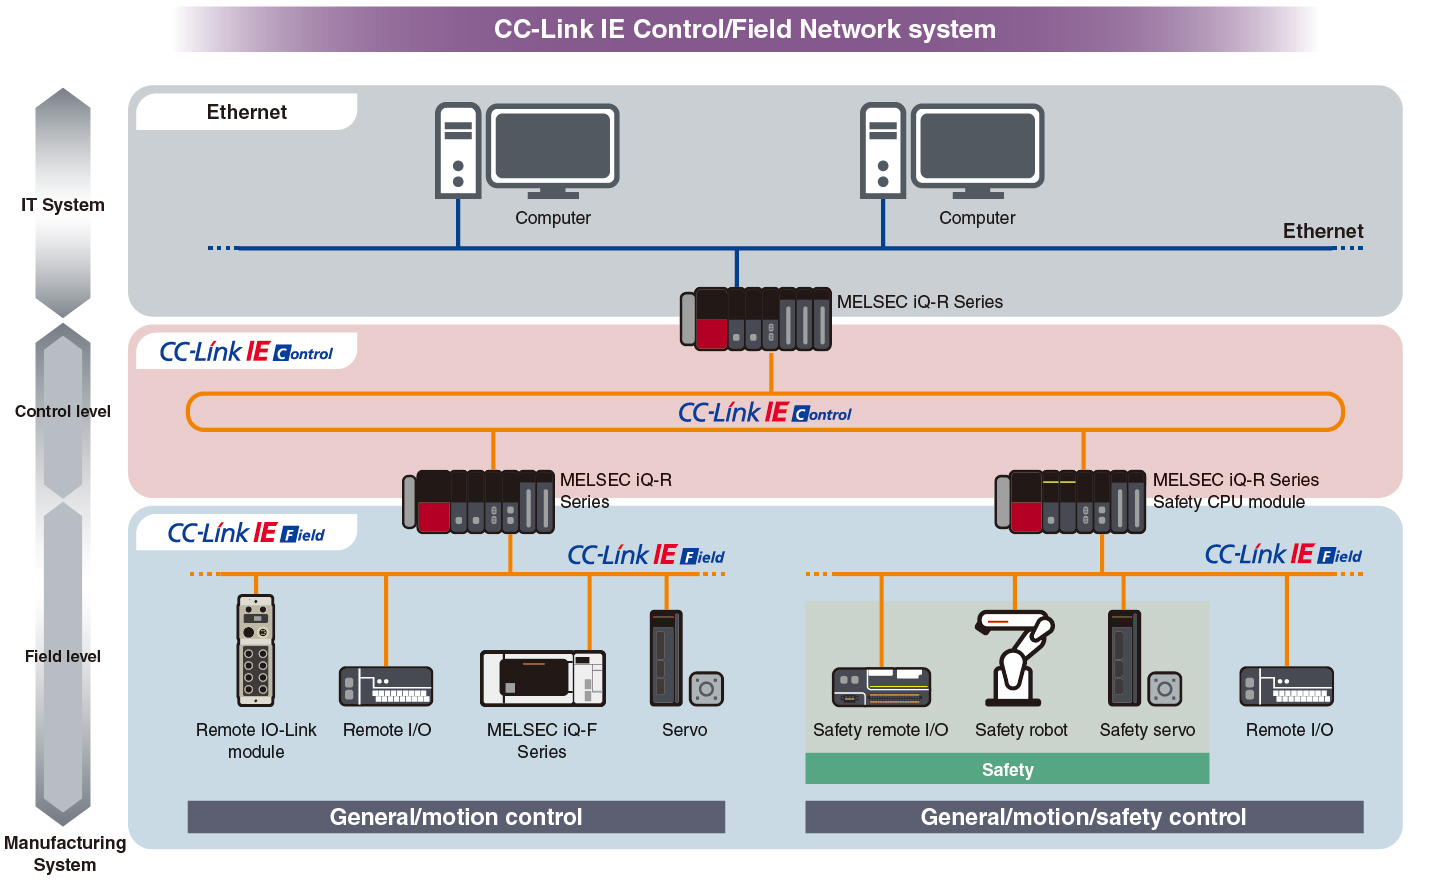 CC-Link IE Control/Field Network